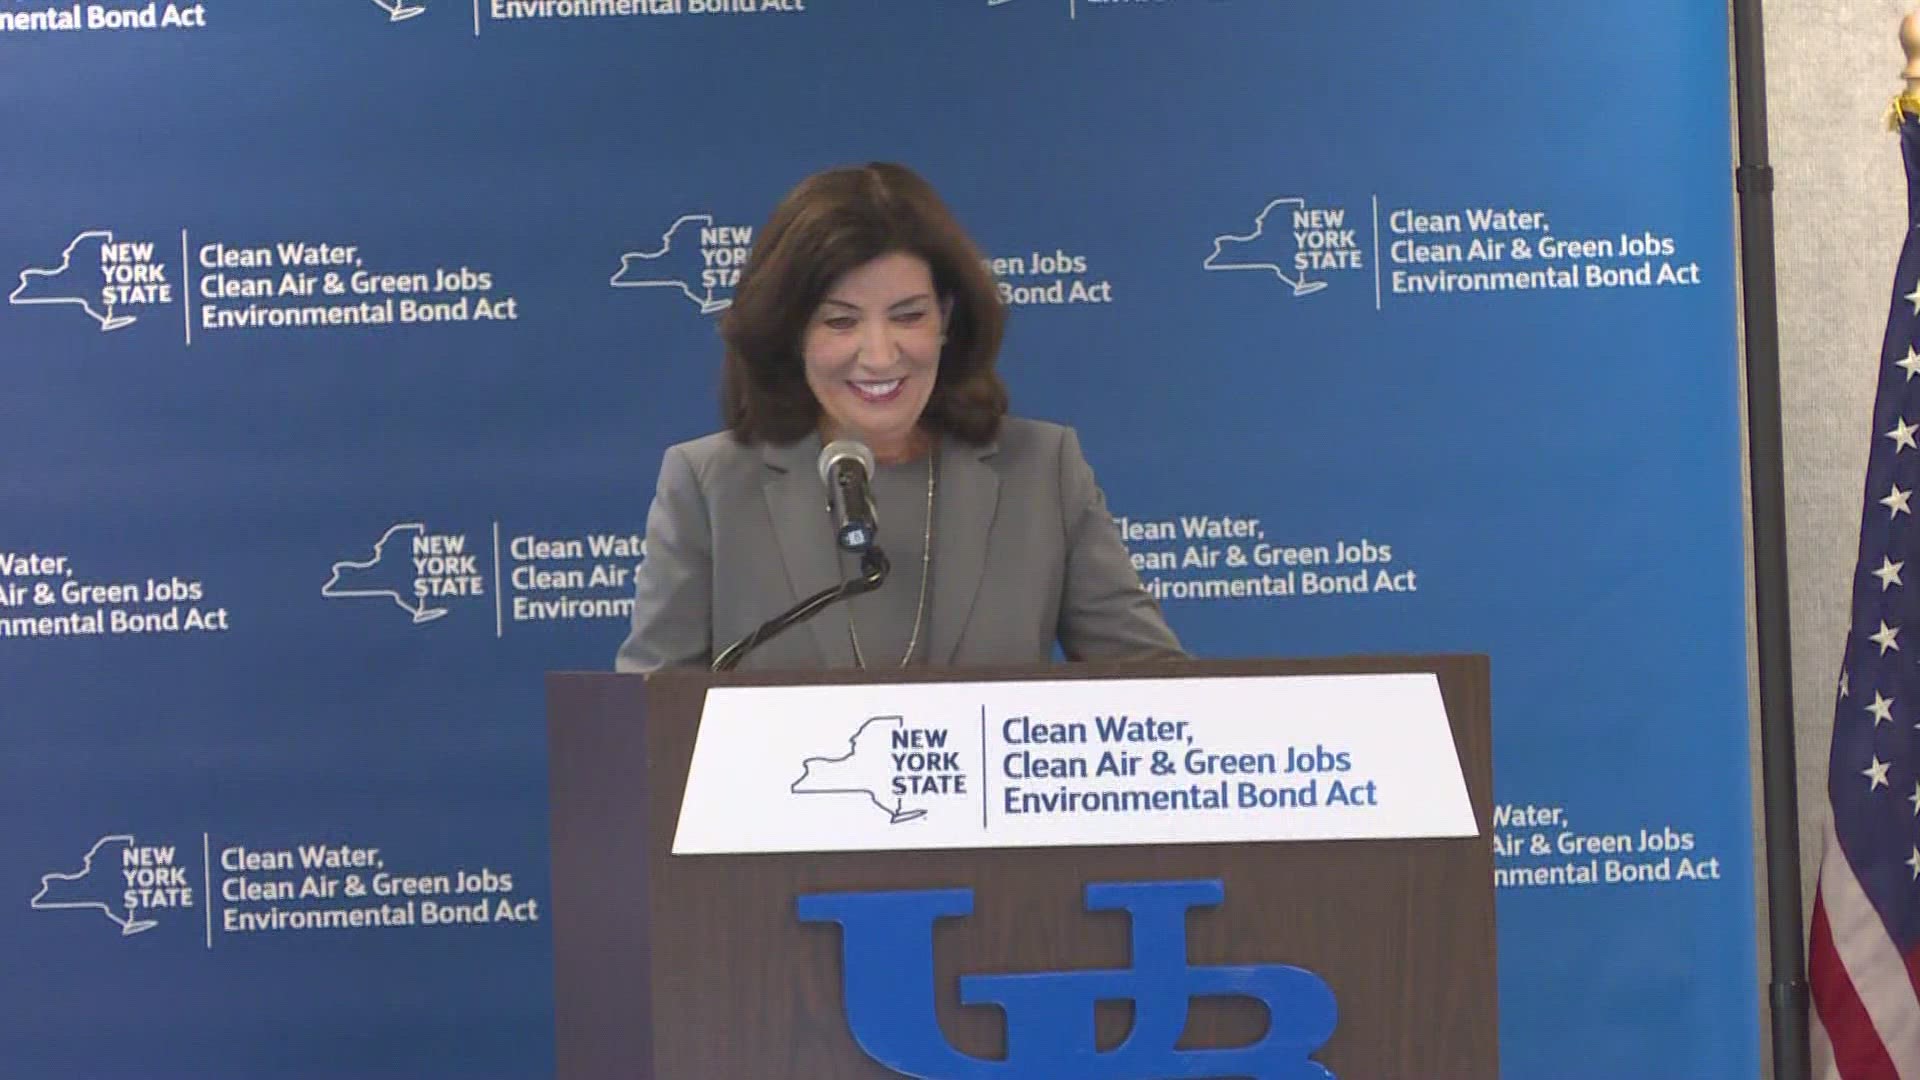 NY Gov. Kathy Hochul was in Amherst for the Clean Water, Clean Air & Green Jobs Environmental Bond Act listening tour.